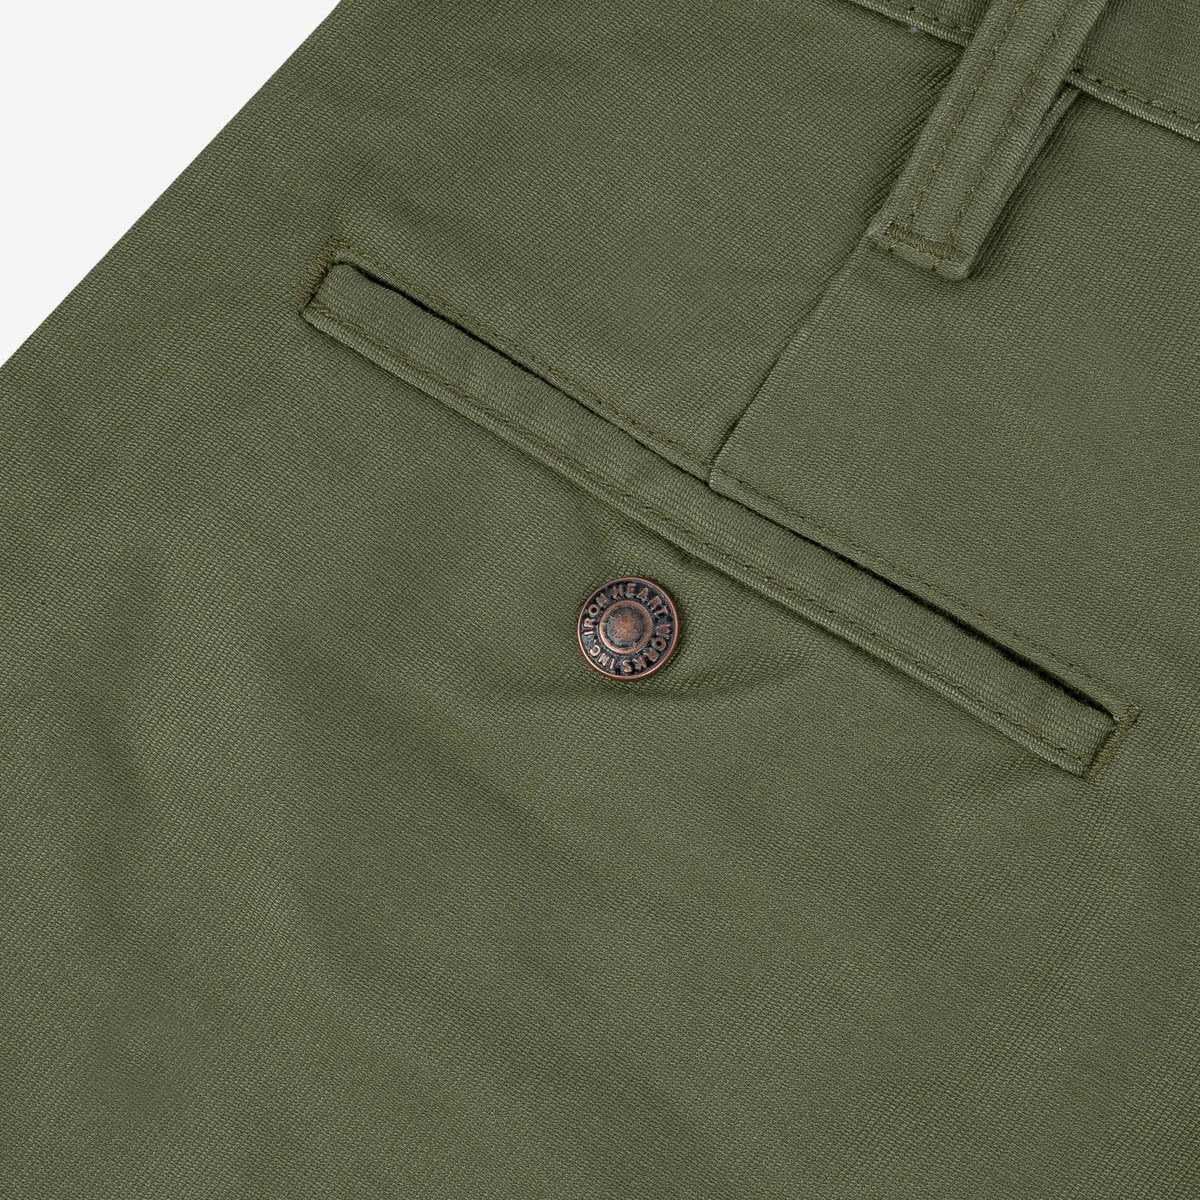 11oz Cotton Whipcord Work Pants - Olive